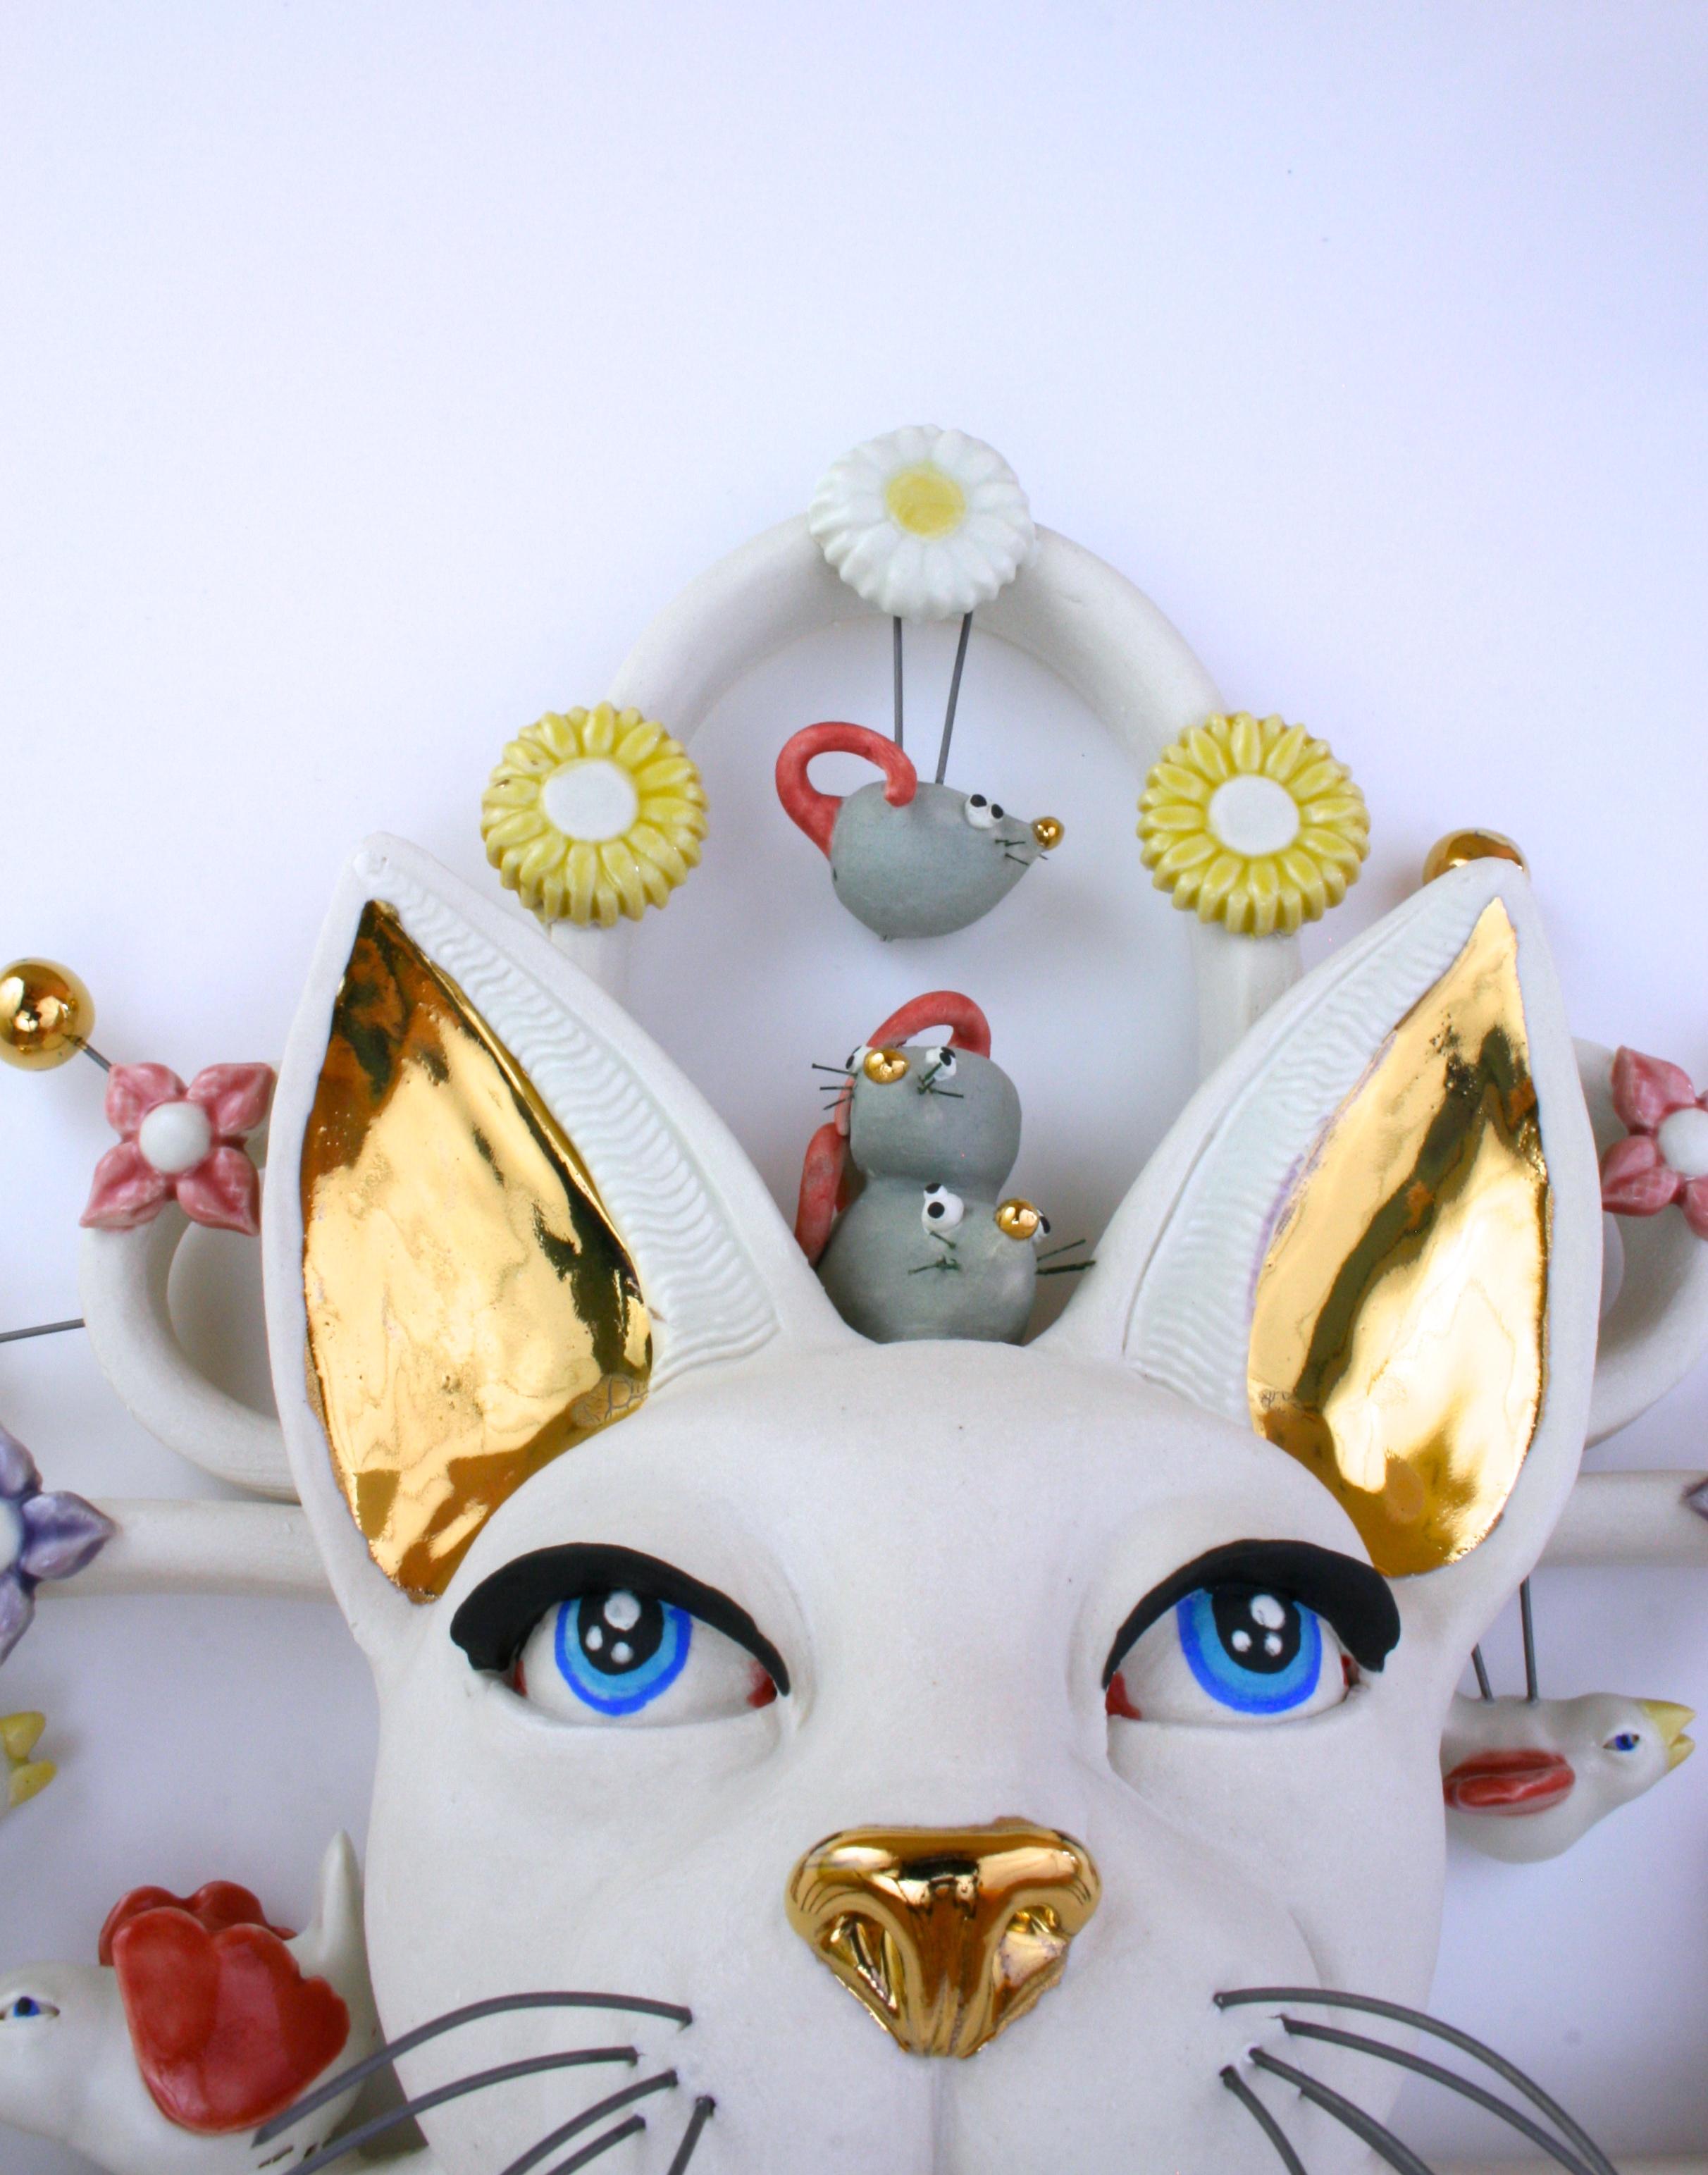 CAT ATTACK - porcelain ceramic sculpture with cat, birds, mice, fish and flowers - Pop Art Sculpture by Taylor Robenalt